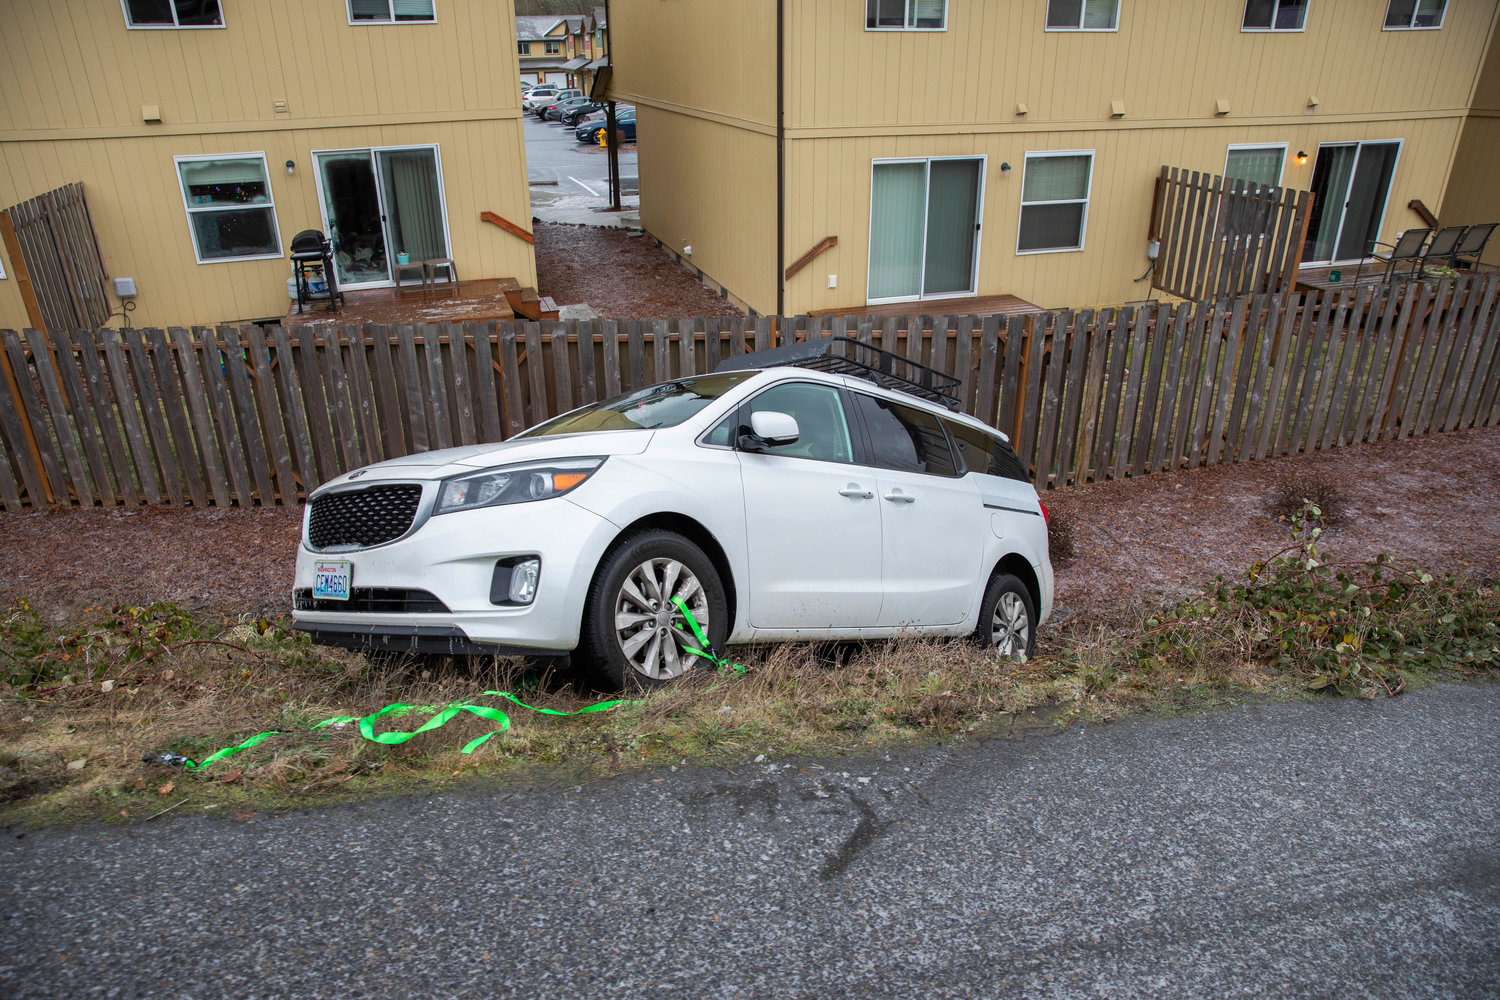 A Kia is seen off SW Salsbury Ave. in Chehalis on Friday.